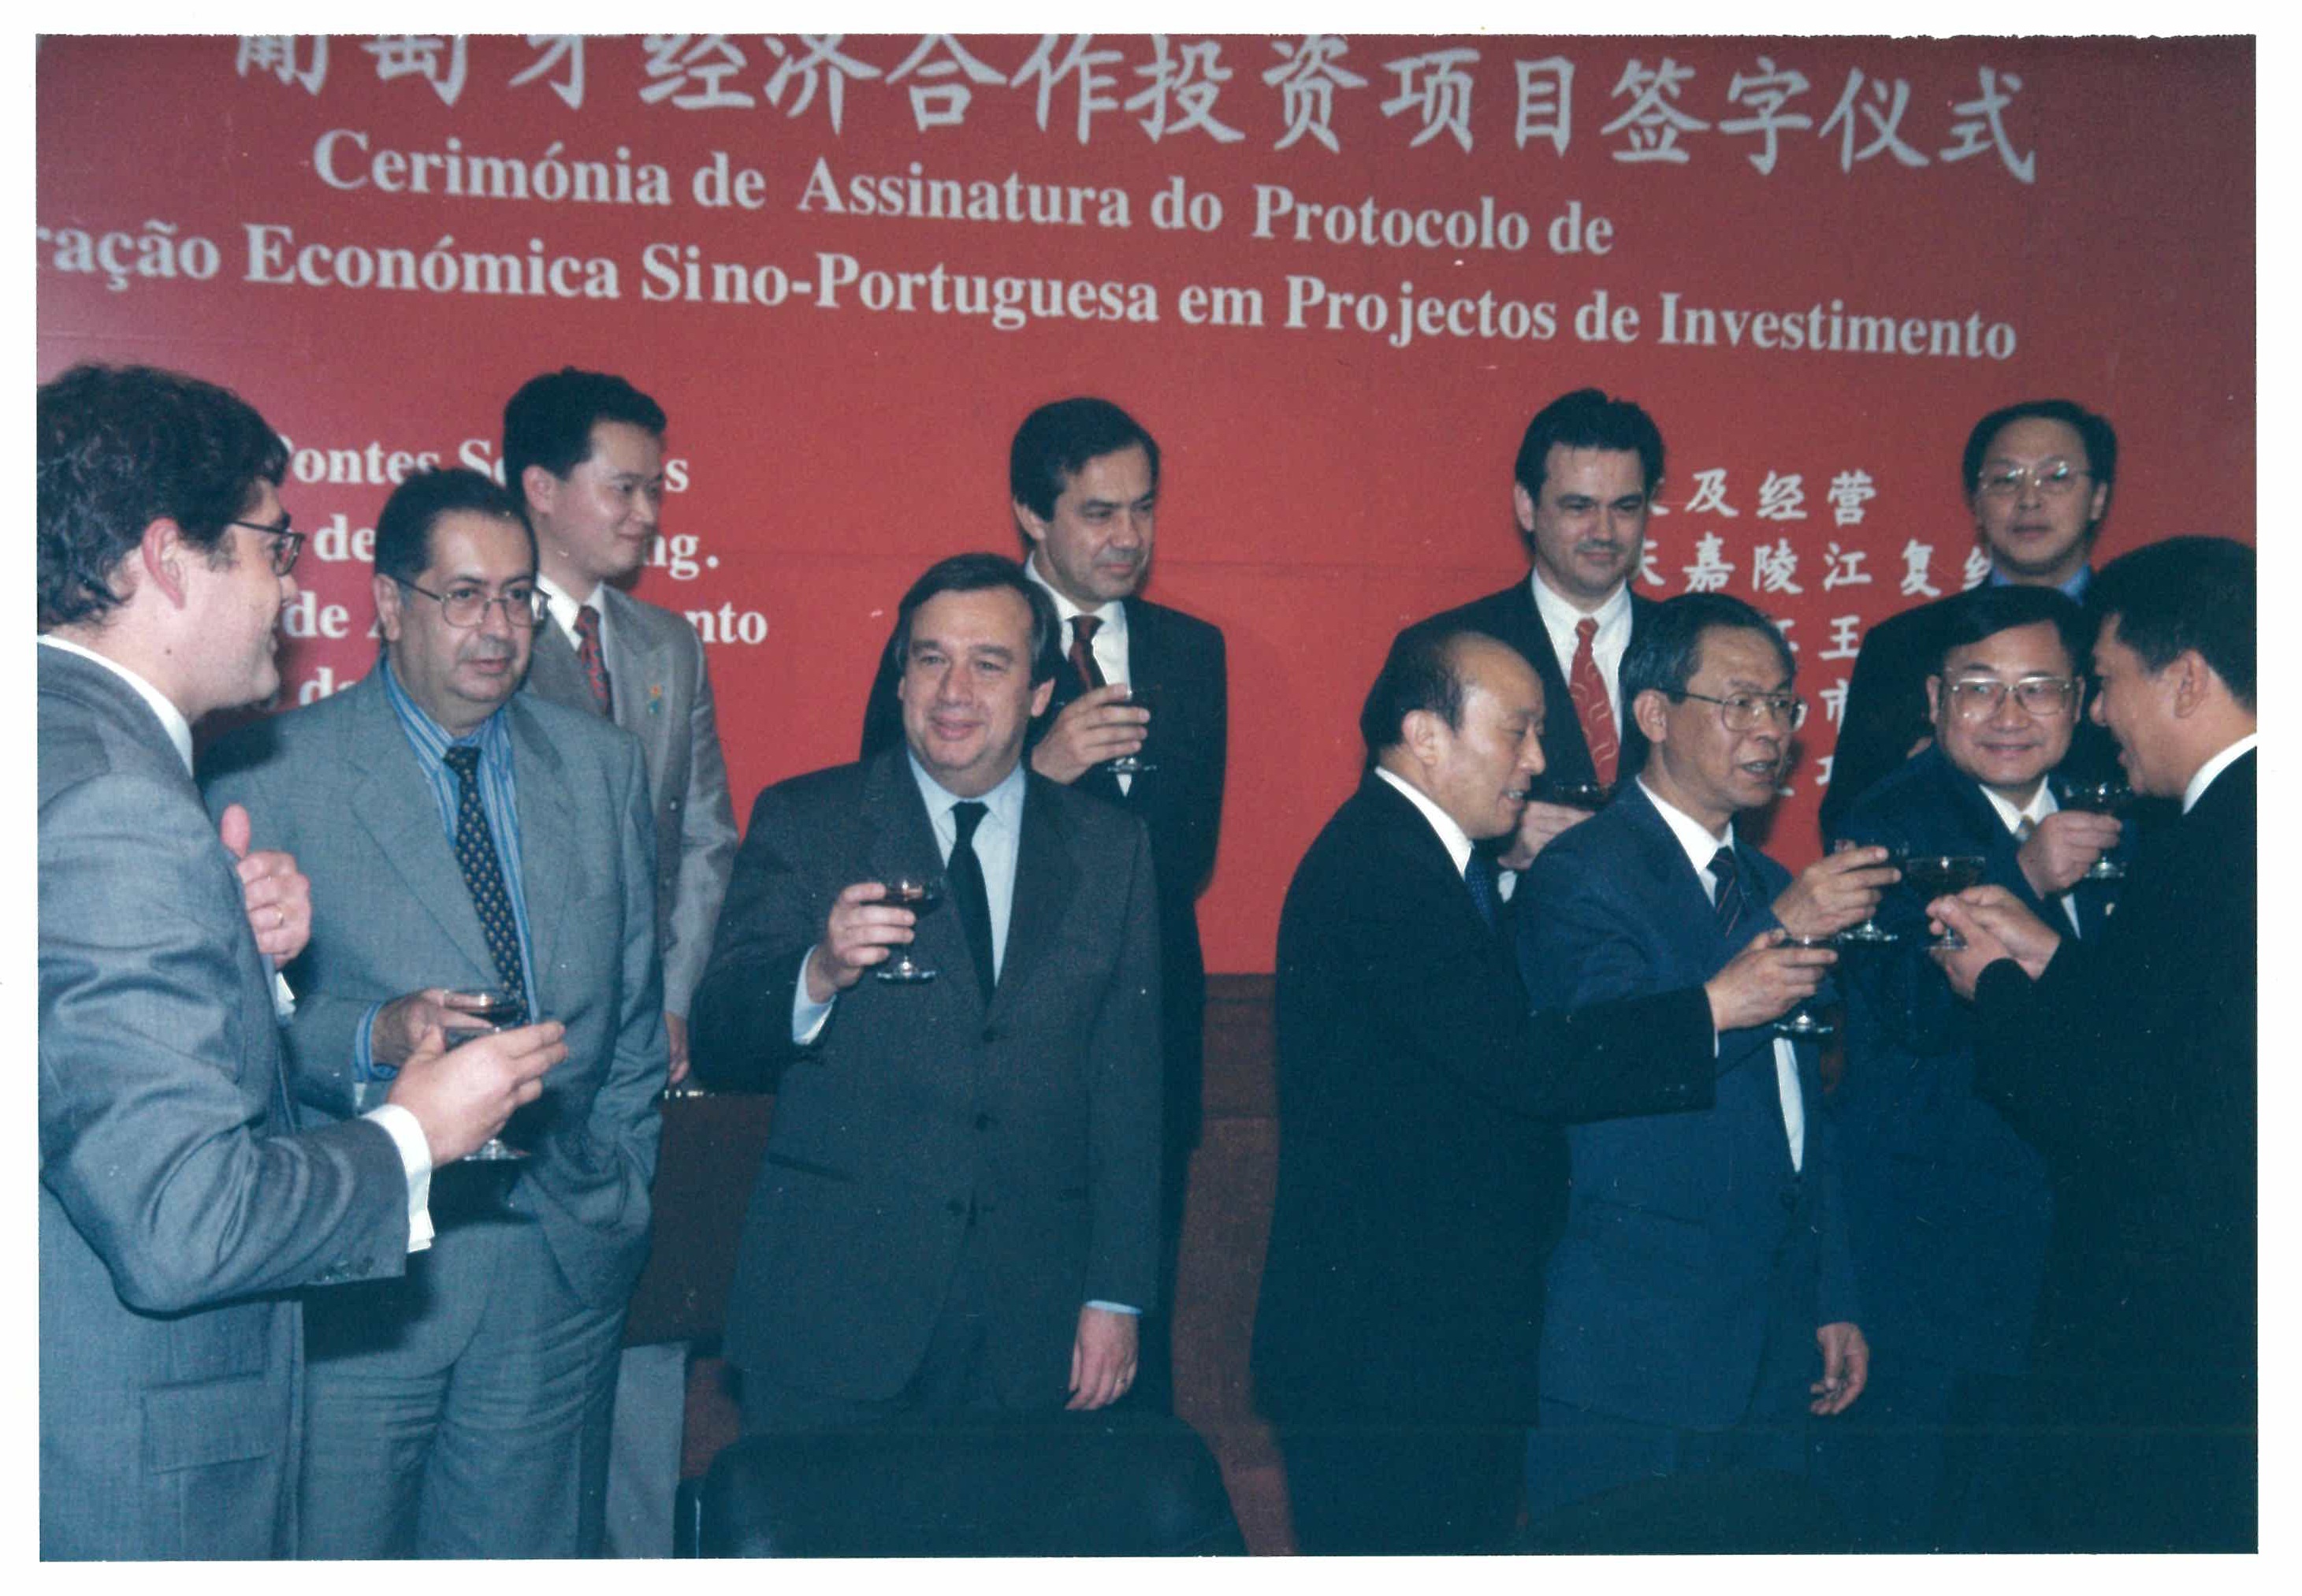 CESL Asia Signing Ceremony of the Sino-Portuguese Economic Cooperation Protocol-Investment on Chongqing Bridge